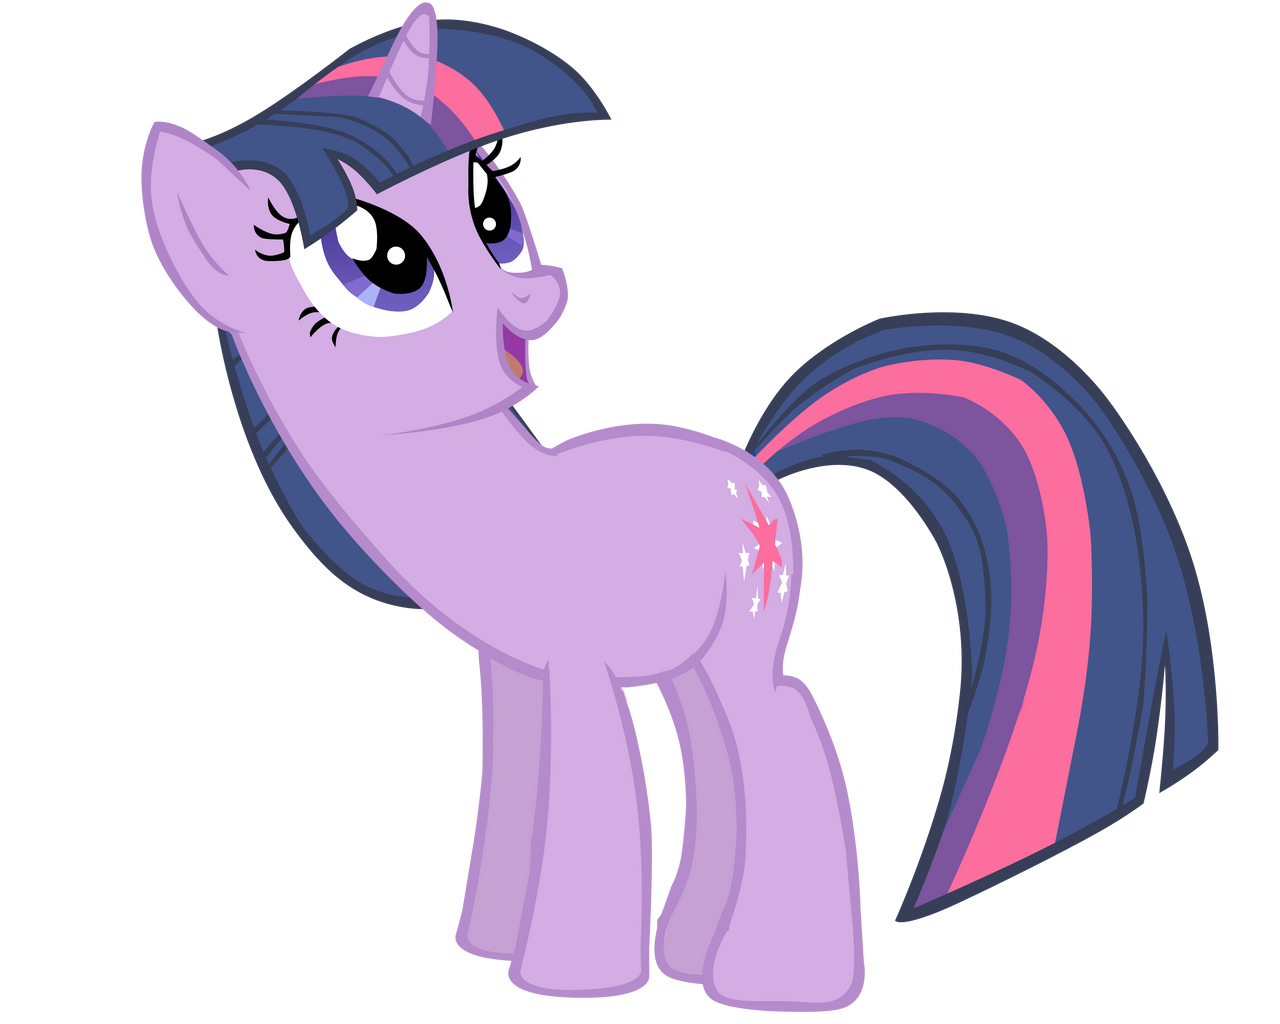 twilight_sparkle_vector_by_ikillyou121-d49mlaz.png